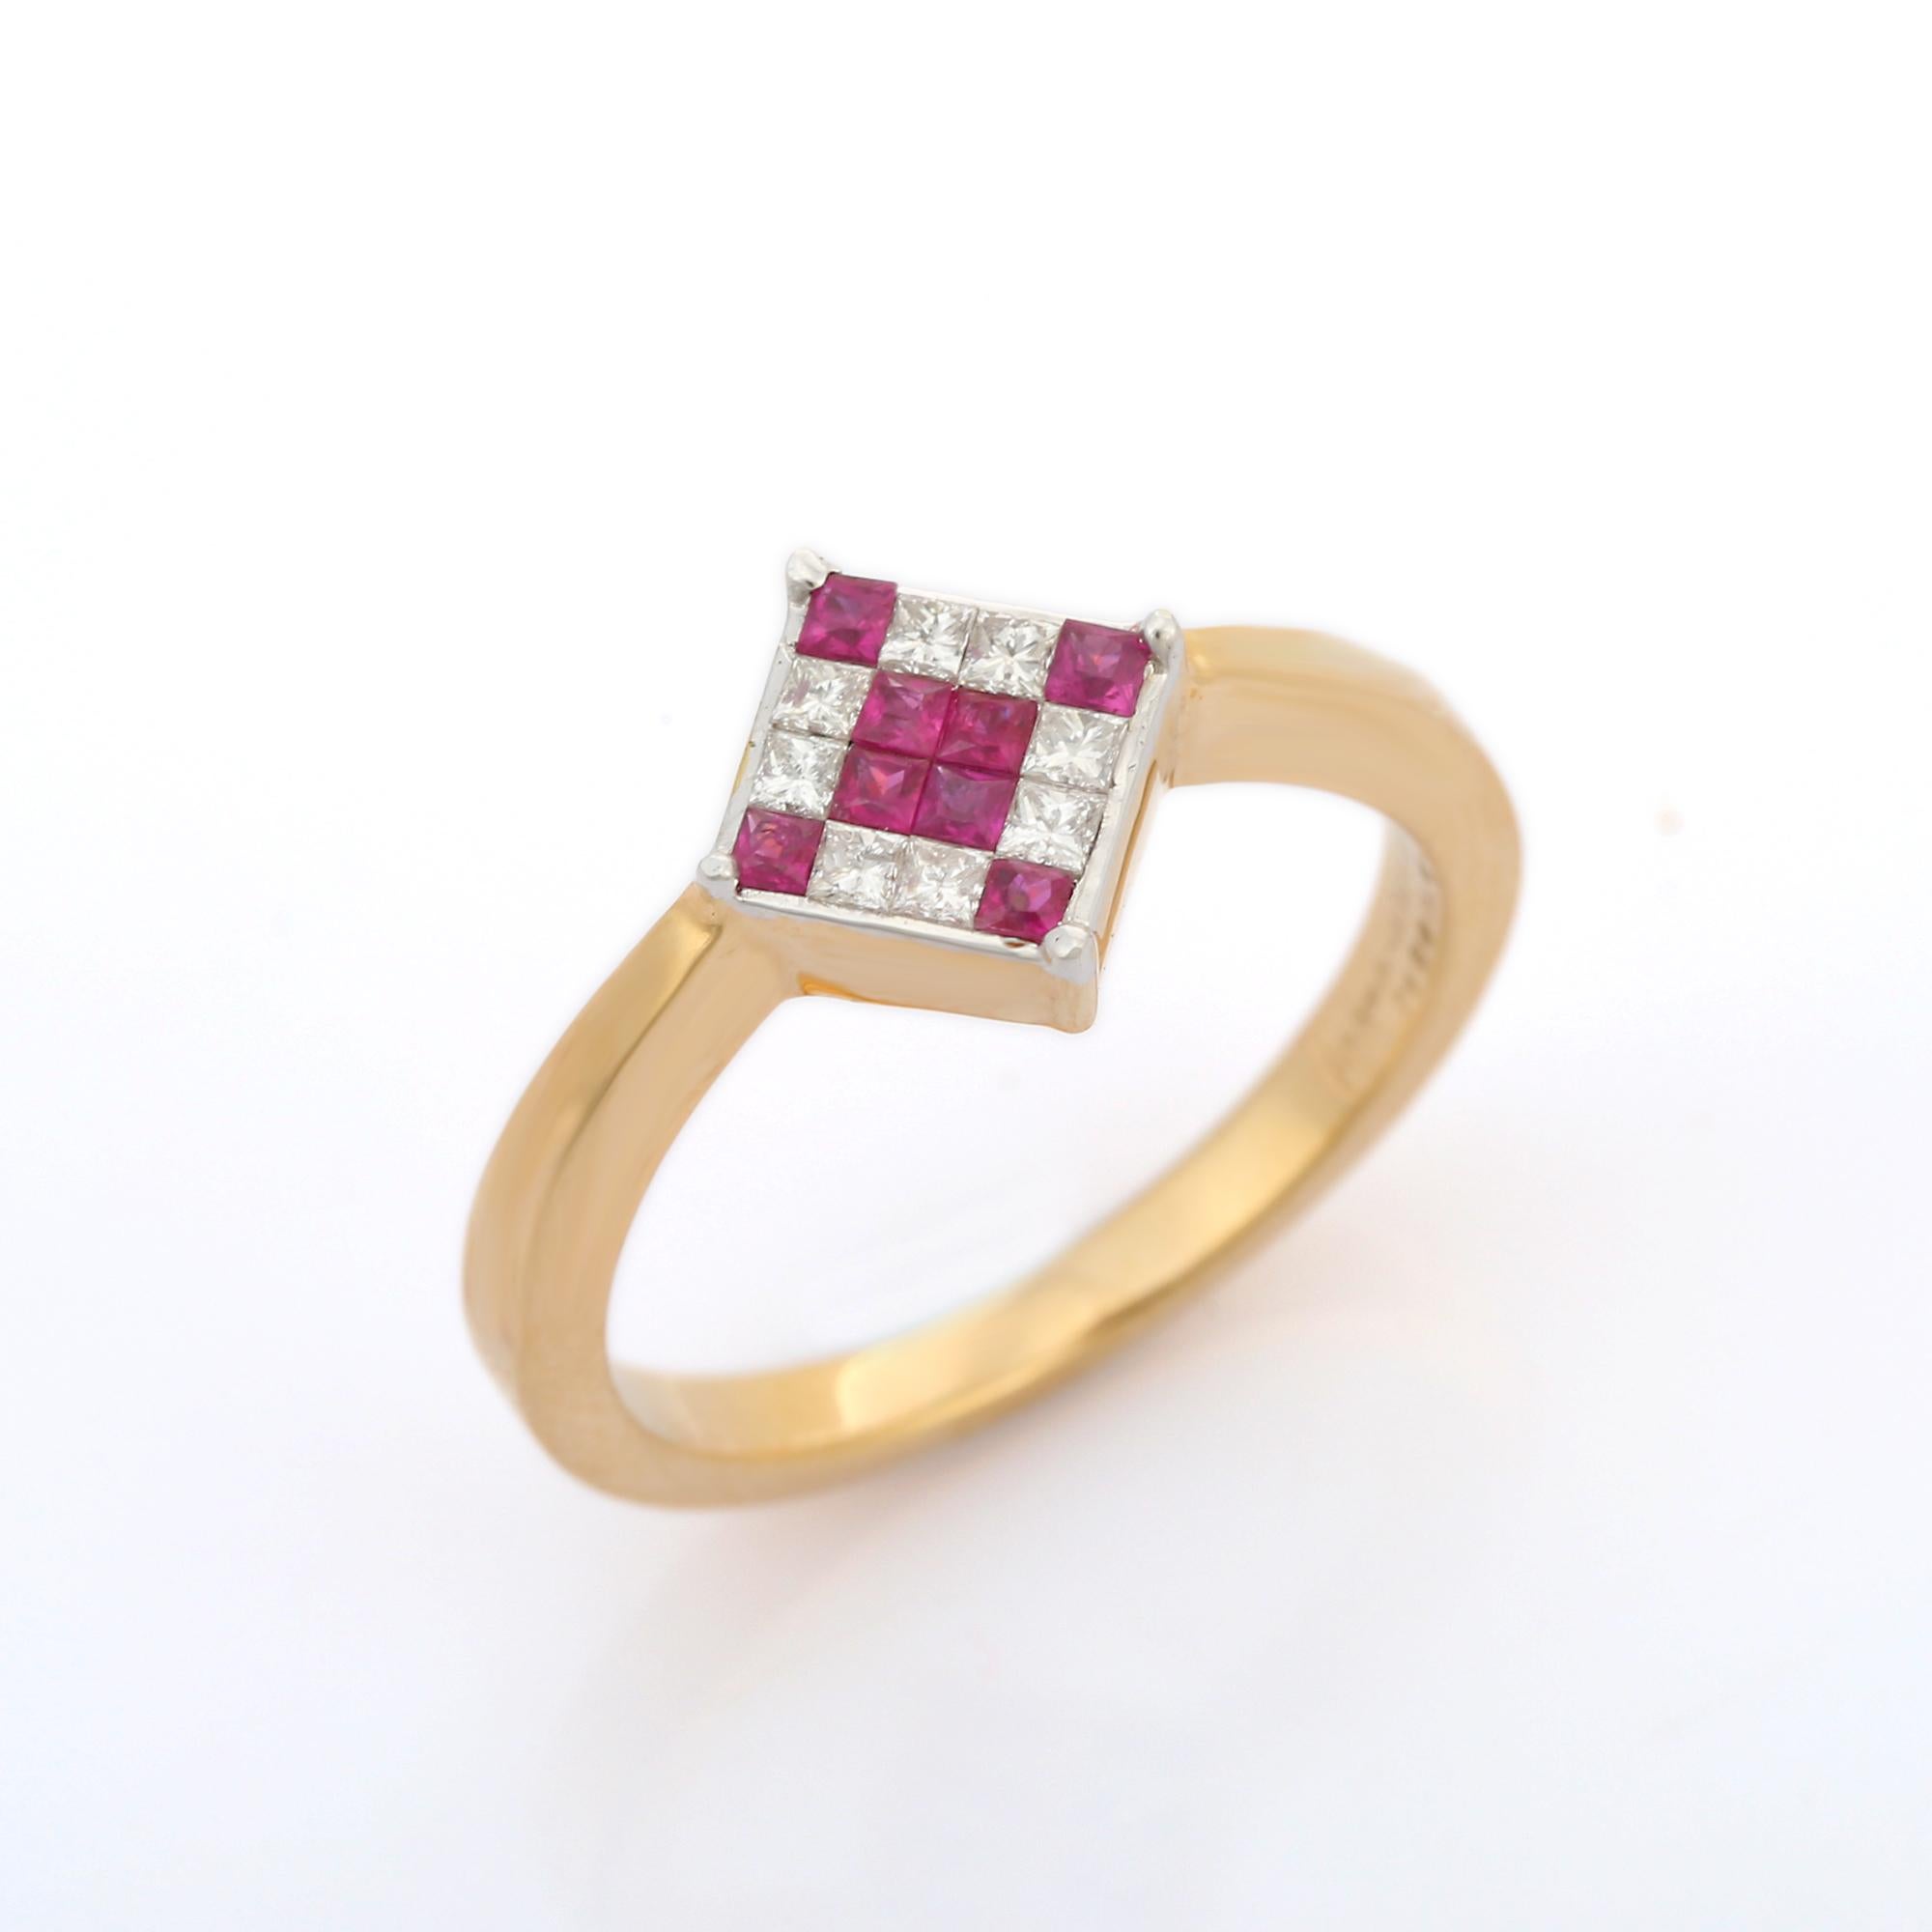 For Sale:  Minimal Mosaic Diamond Ruby Square Stacking Ring in 18K Yellow Gold Settings 5